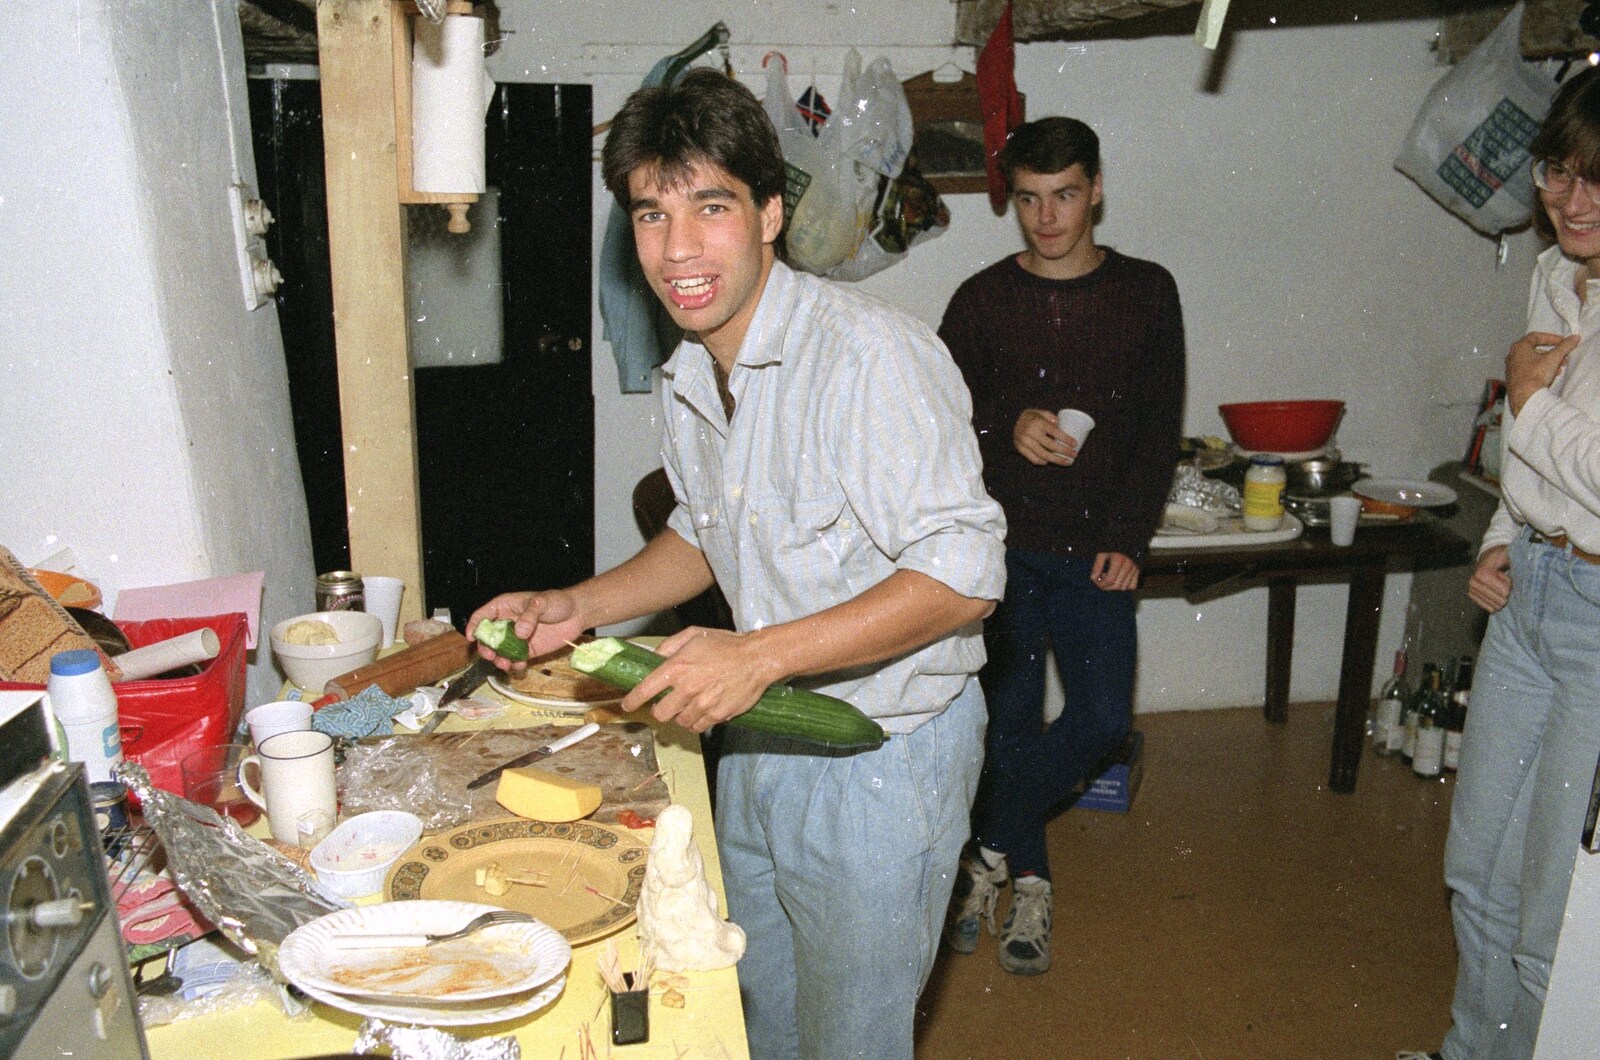 Liz's Party, Abergavenny, Monmouthshire, Wales - 4th August 1990: Nigel Mukherjee with a cucumber